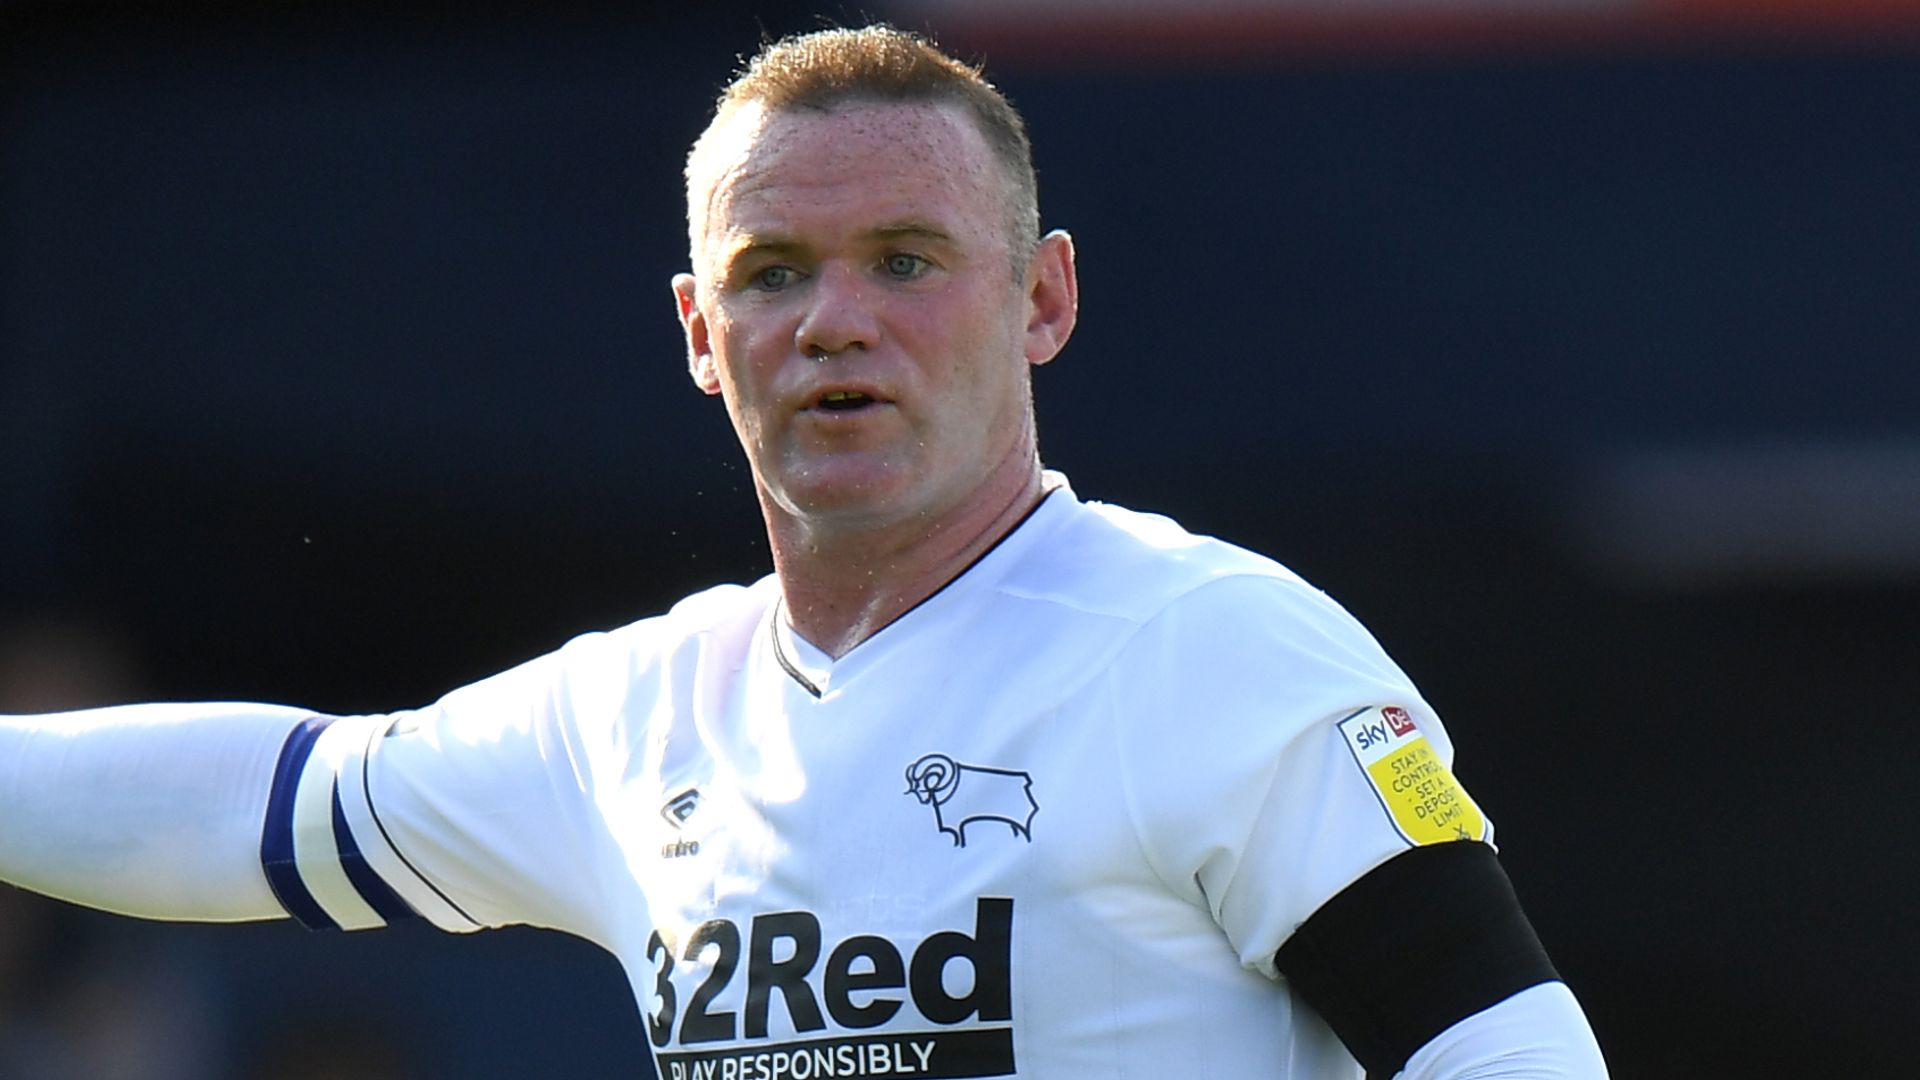 Rooney 'senior coaching figure' at Derby after Cocu exit